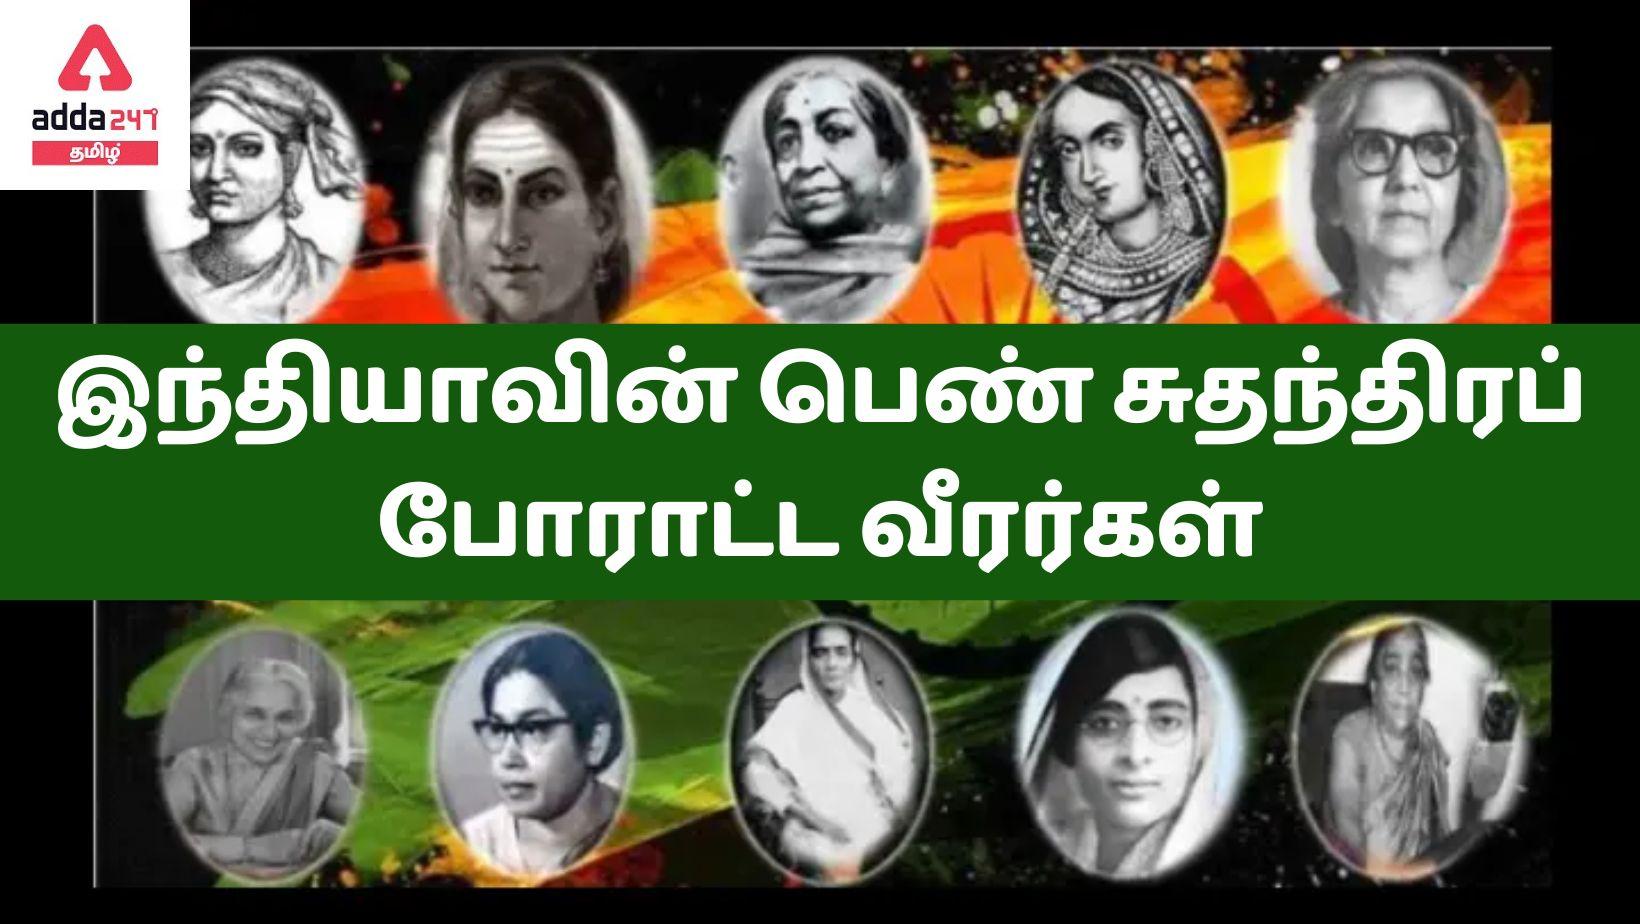 Women Freedom Fighters of India